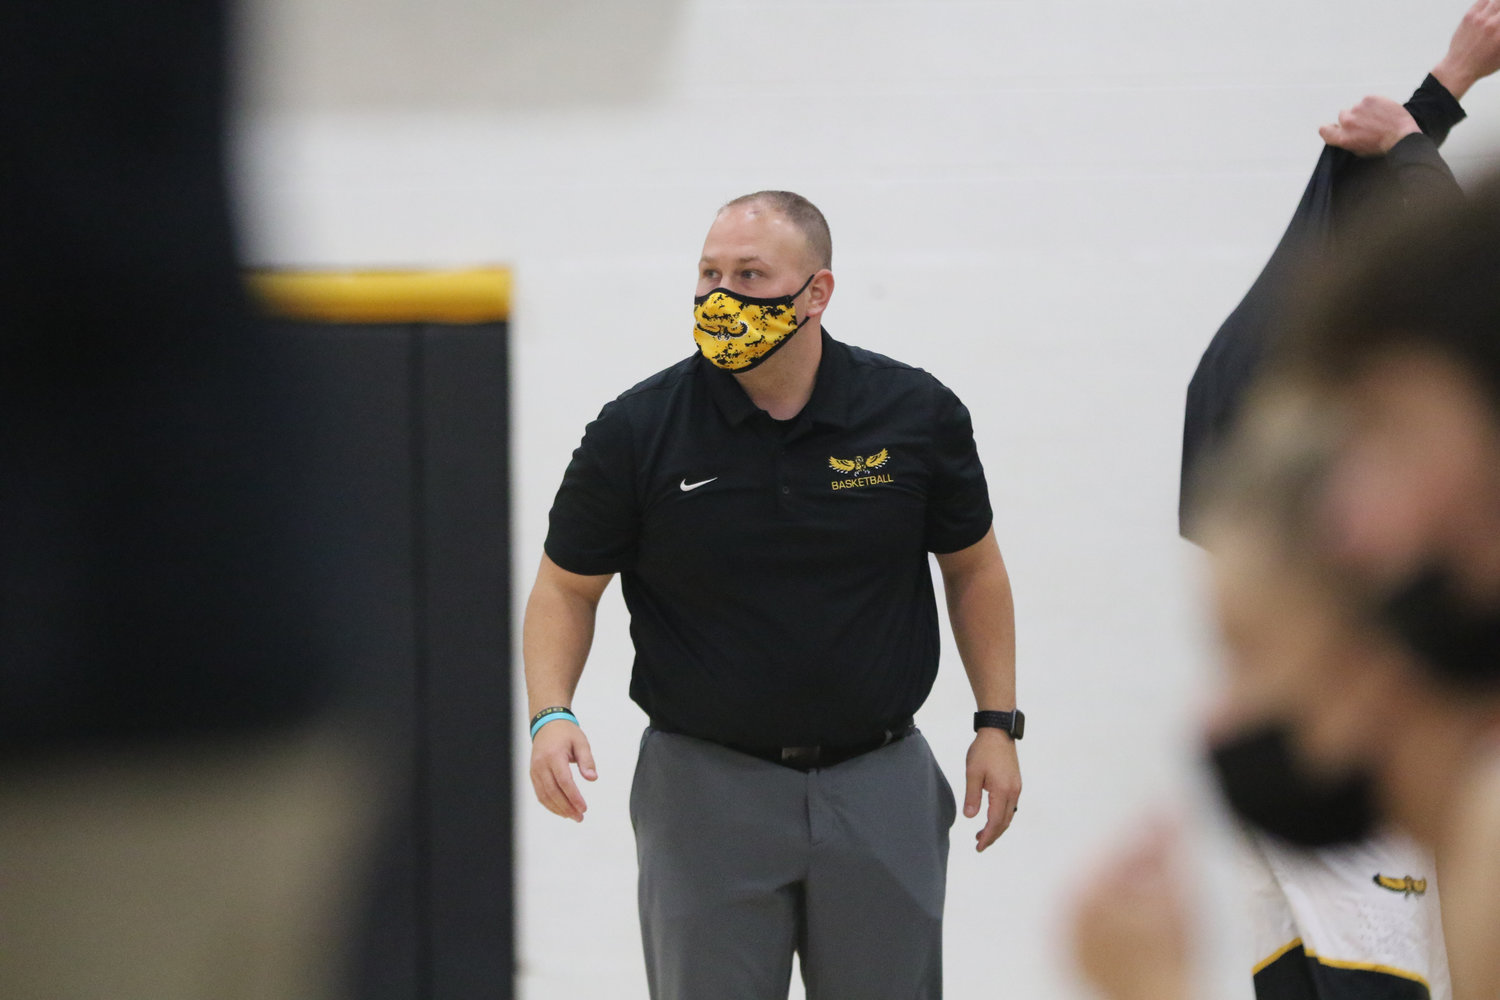 Mid-Prairie coach Daren Lambert watches the action during the first quarter of a scrimmage with Mediapolis in Wellman on Saturday, November 21.